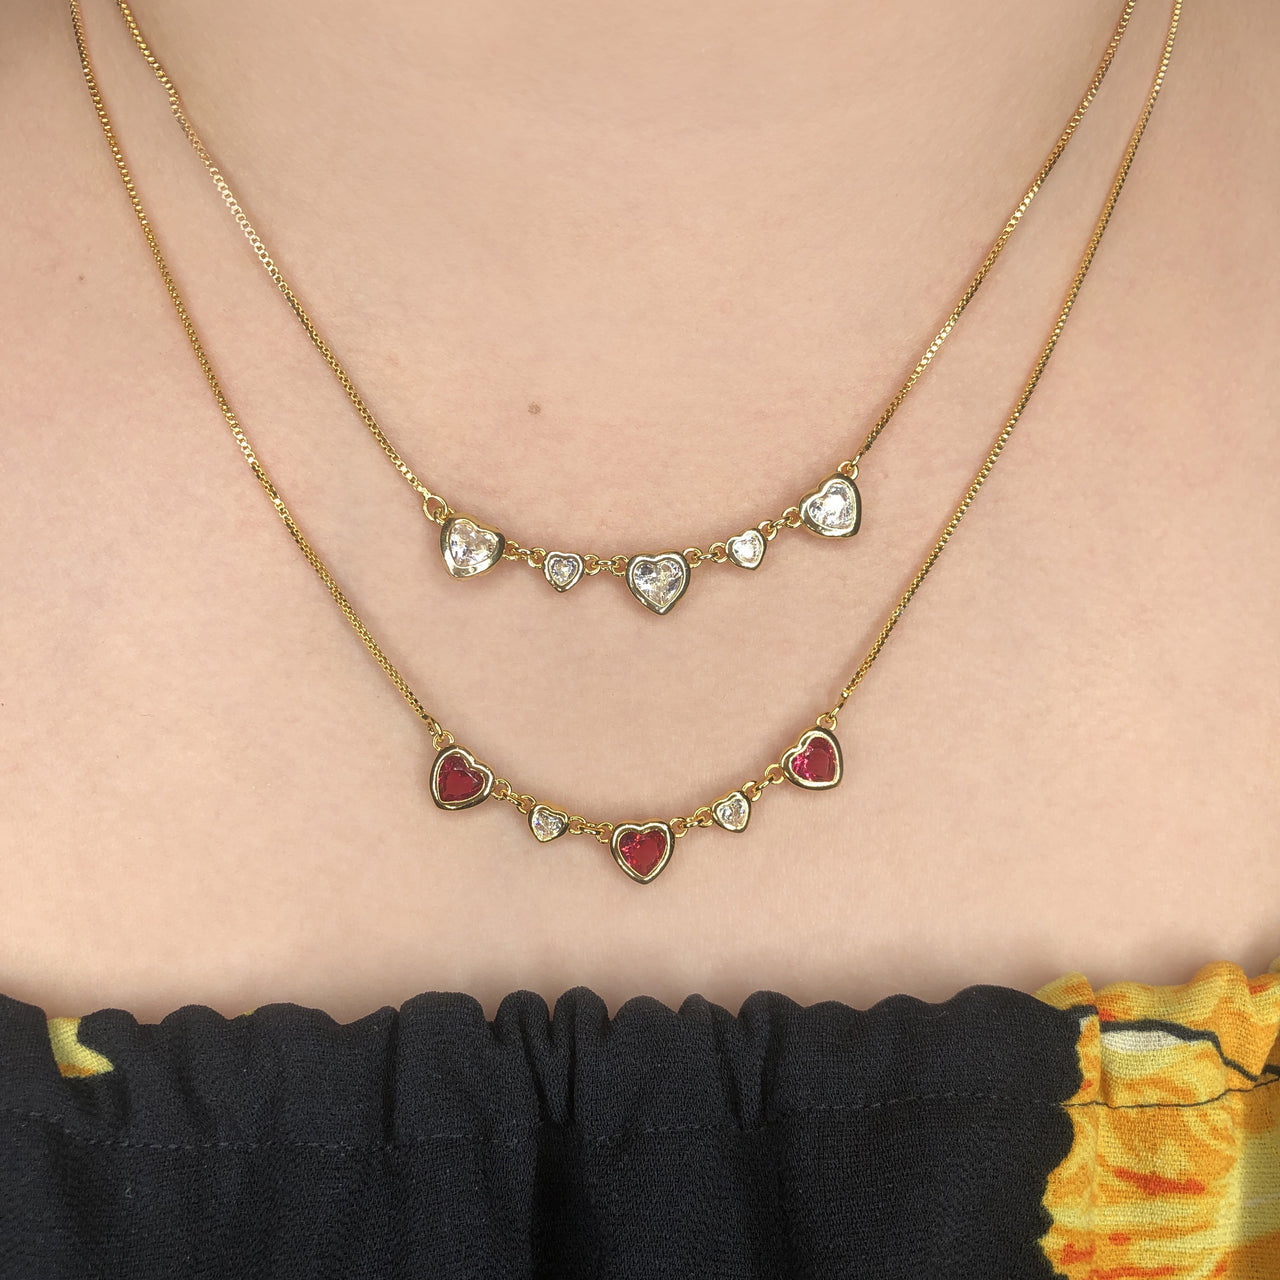 Five hearts necklace (596)